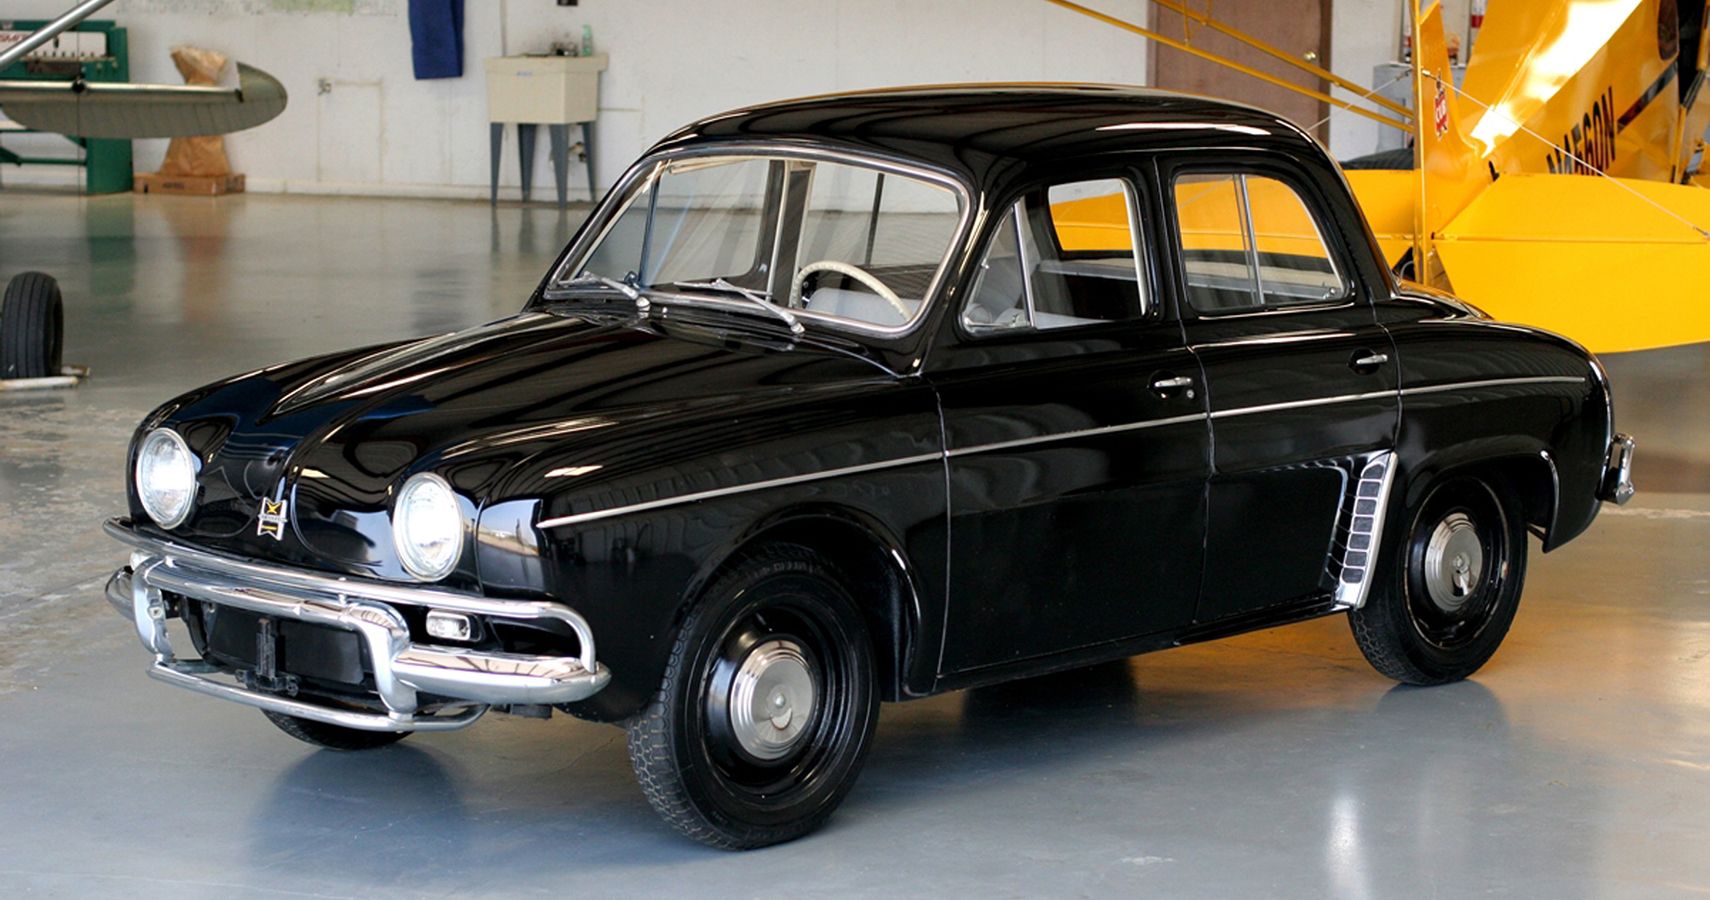 Henney Kilowatt, An Electric Car That Came Based On The Renault Dauphine